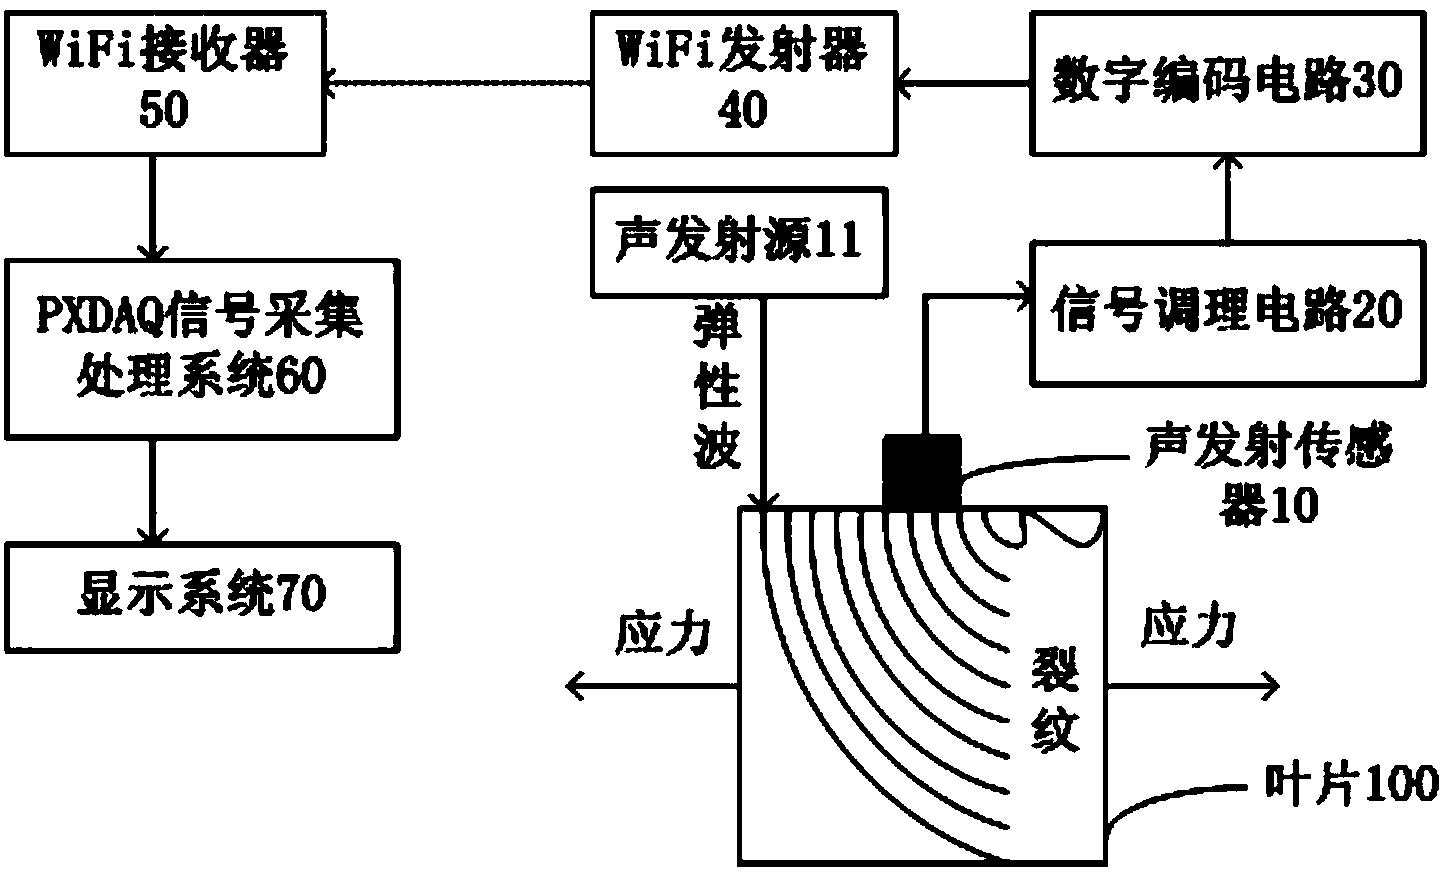 Wind driven generator blade detection device